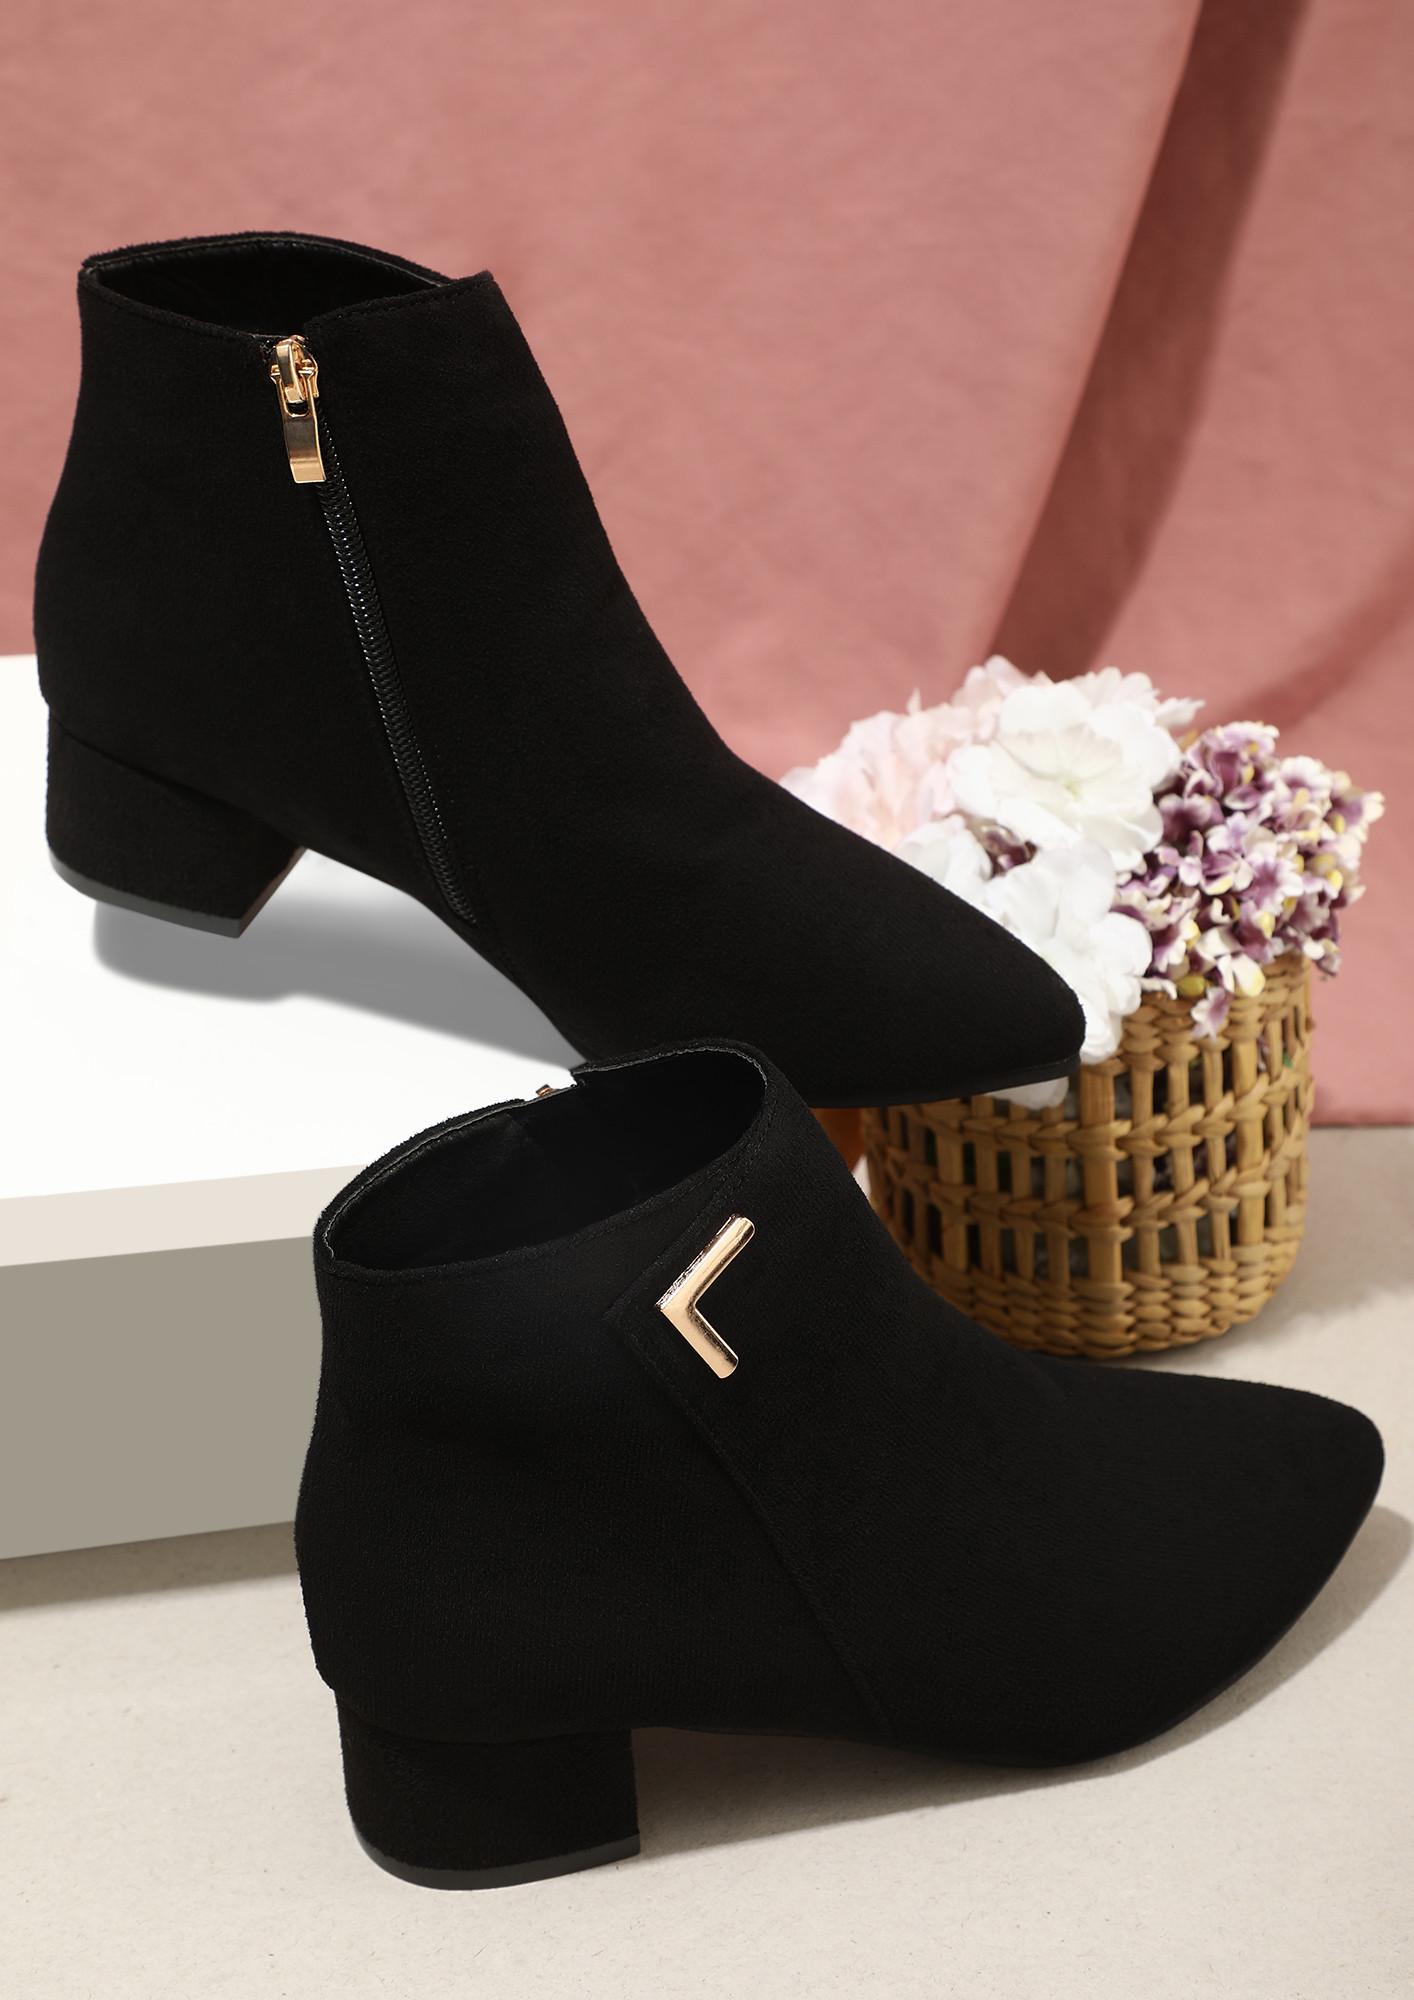 SPICE THINGS UP BLACK BOOTS